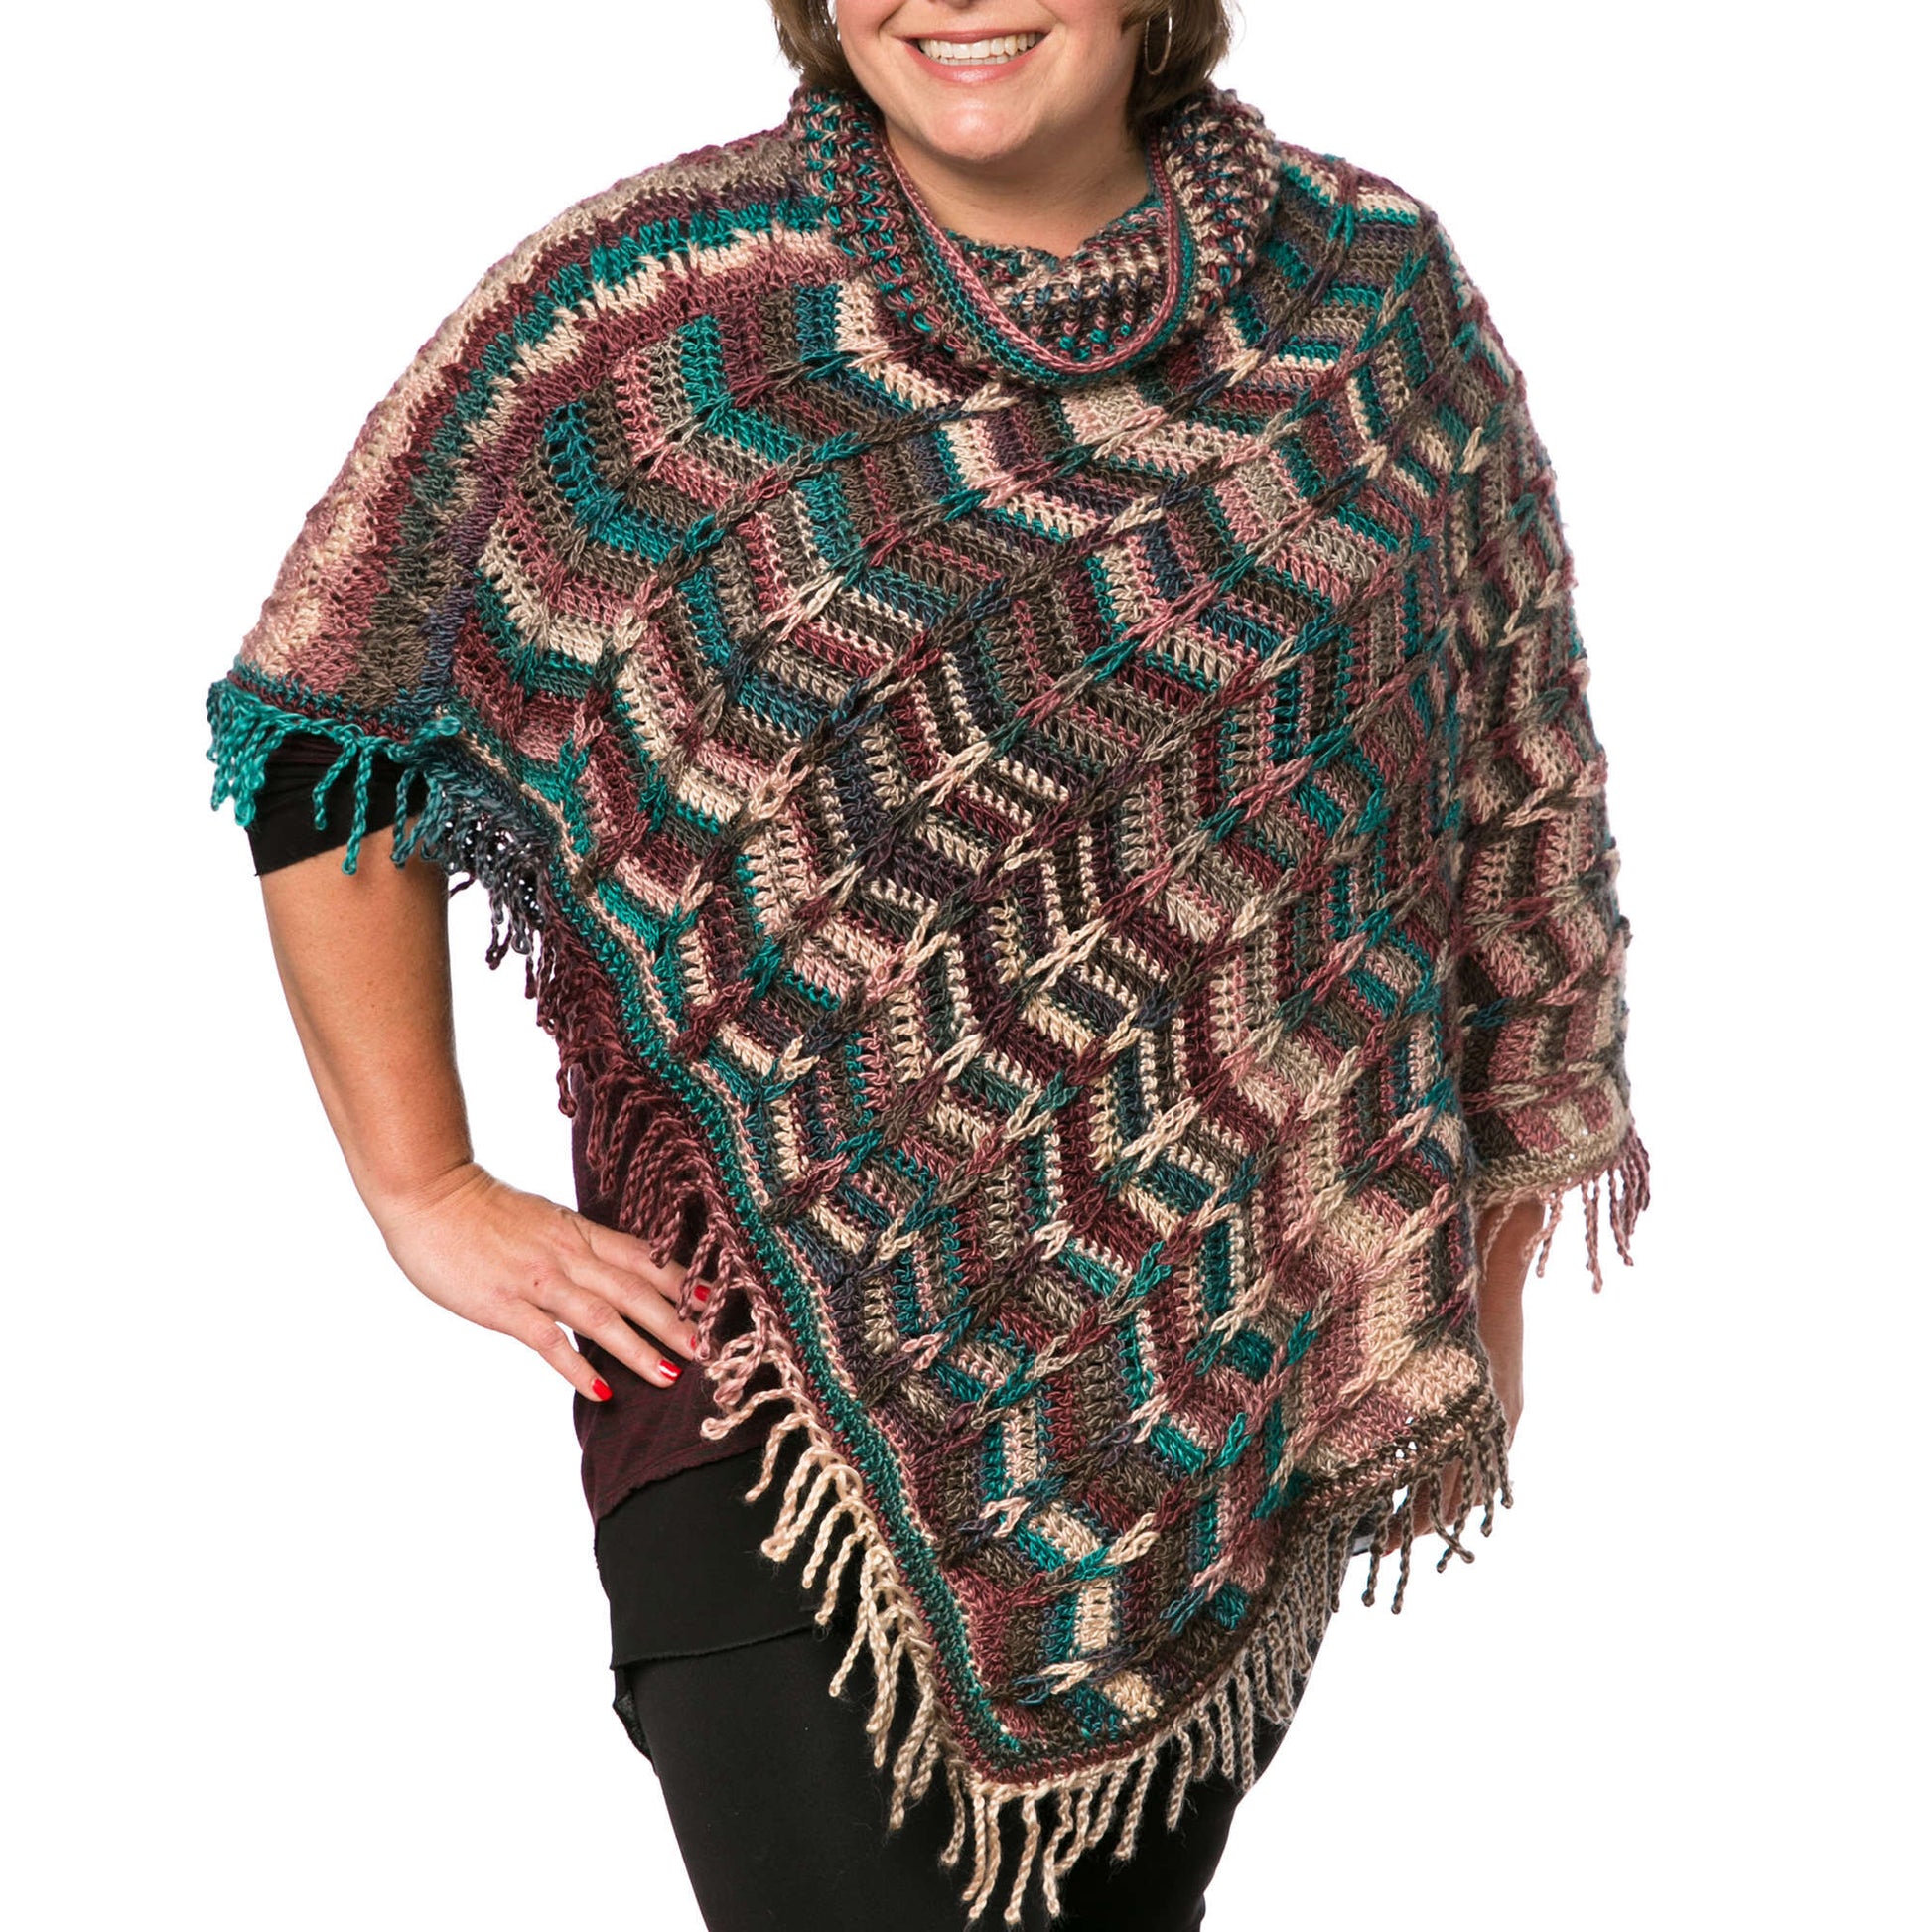 Free Red Heart Crochet Marly's Perfect Simple Cowl Poncho Pattern